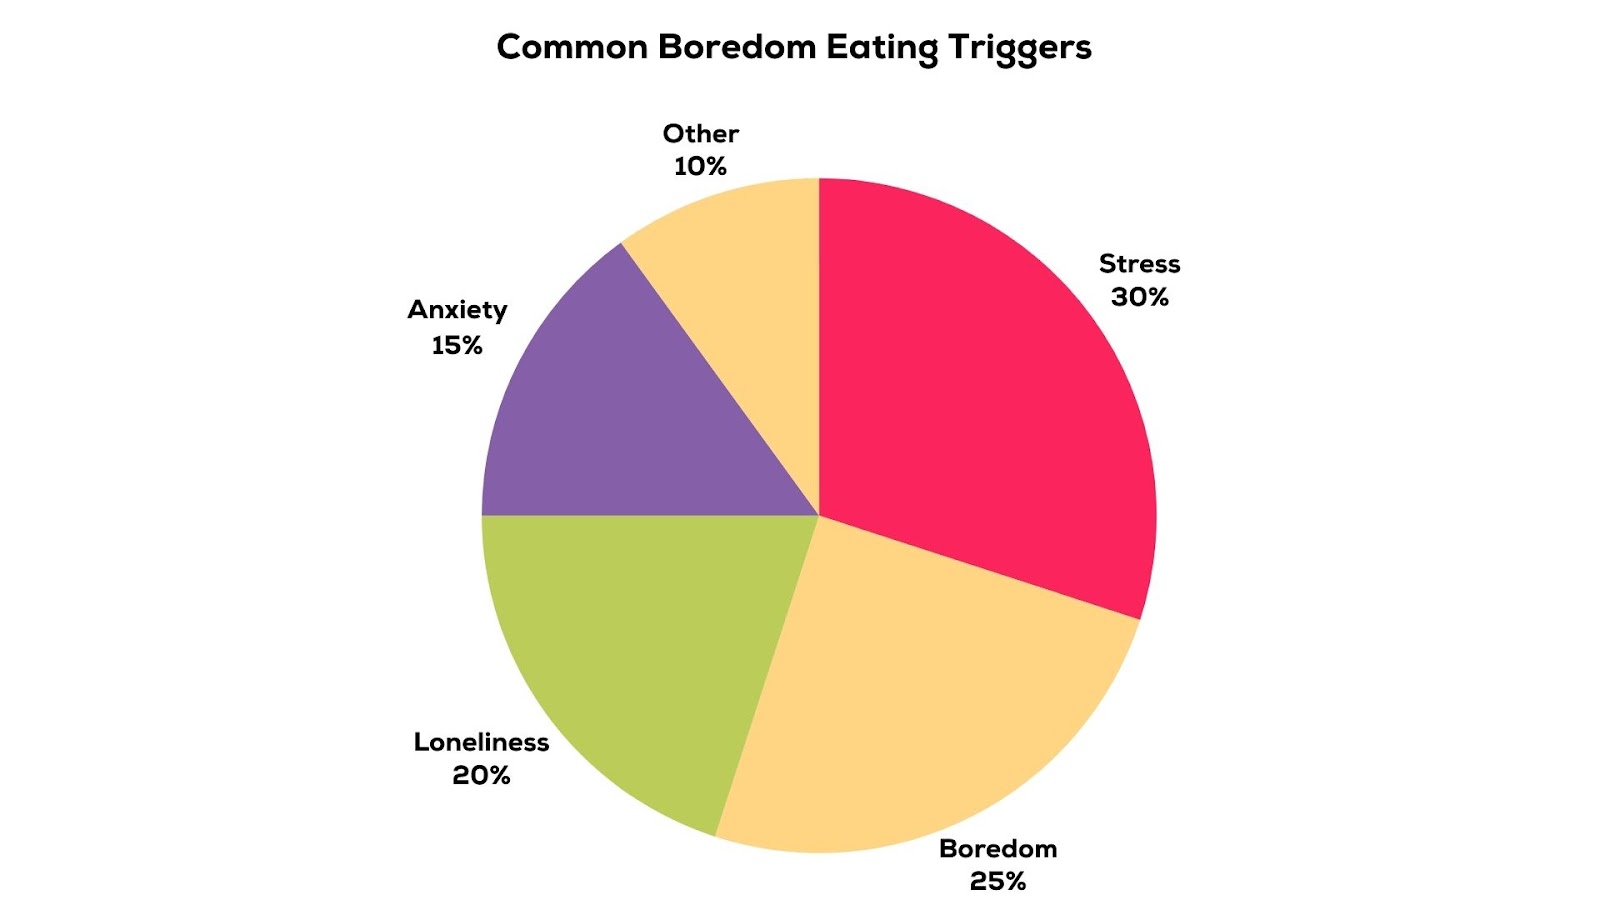 Common Boredom Eating Triggers